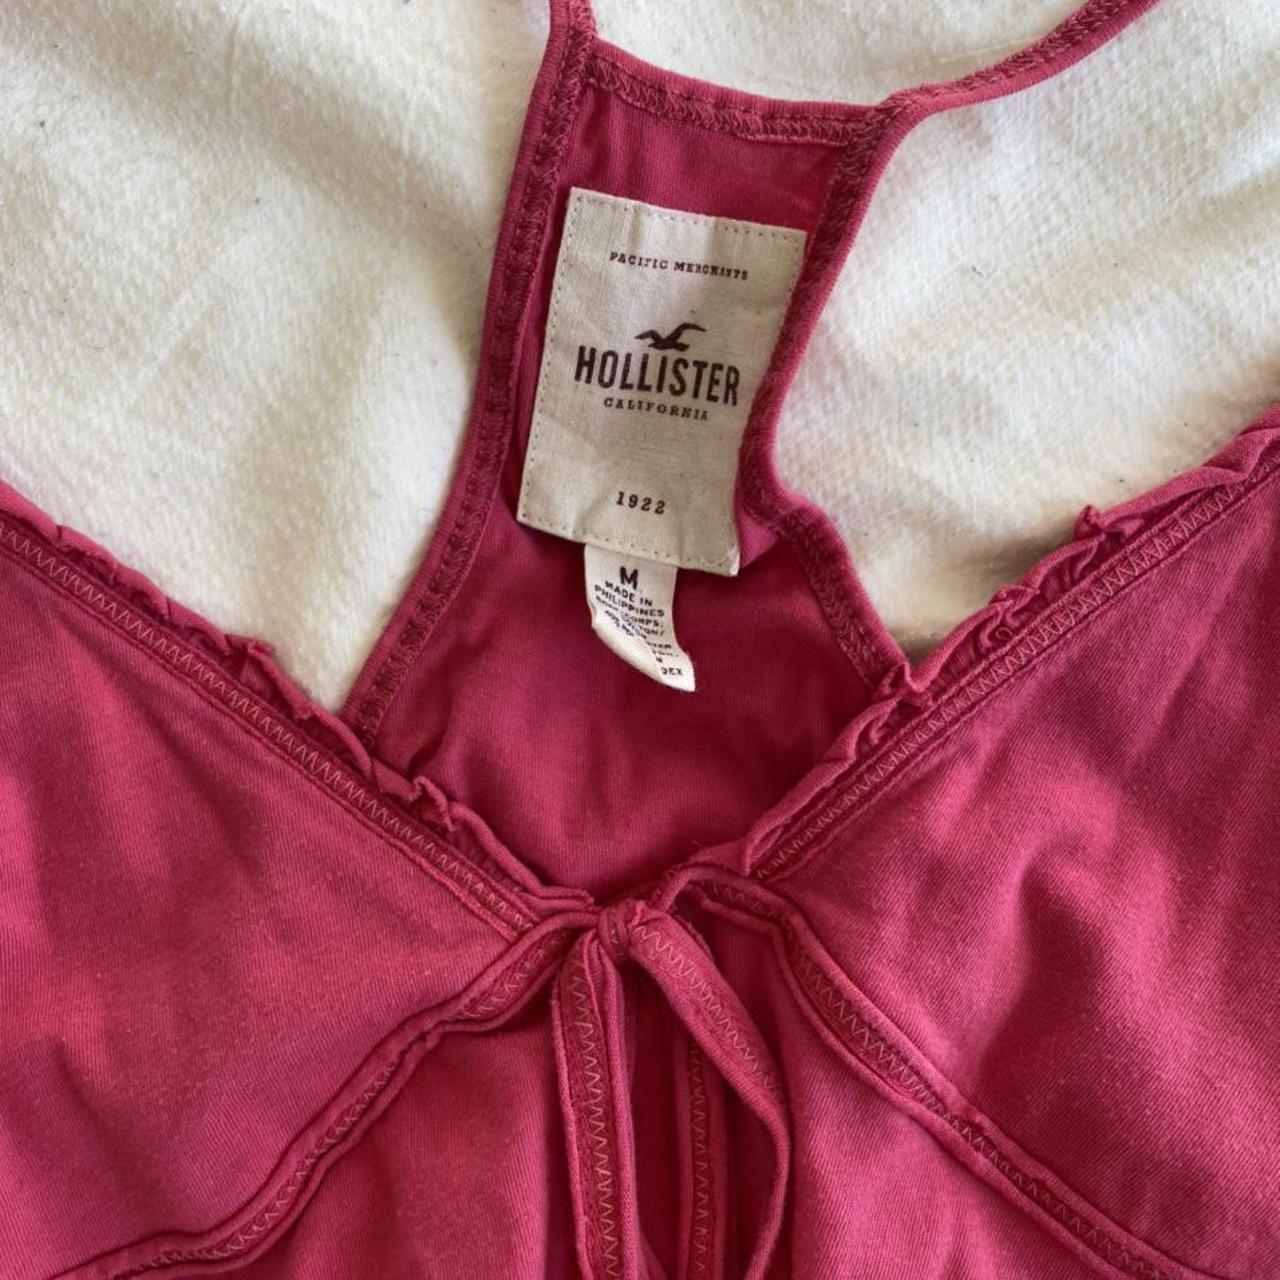 Product Image 4 - Pink Hollister babydoll cami top.